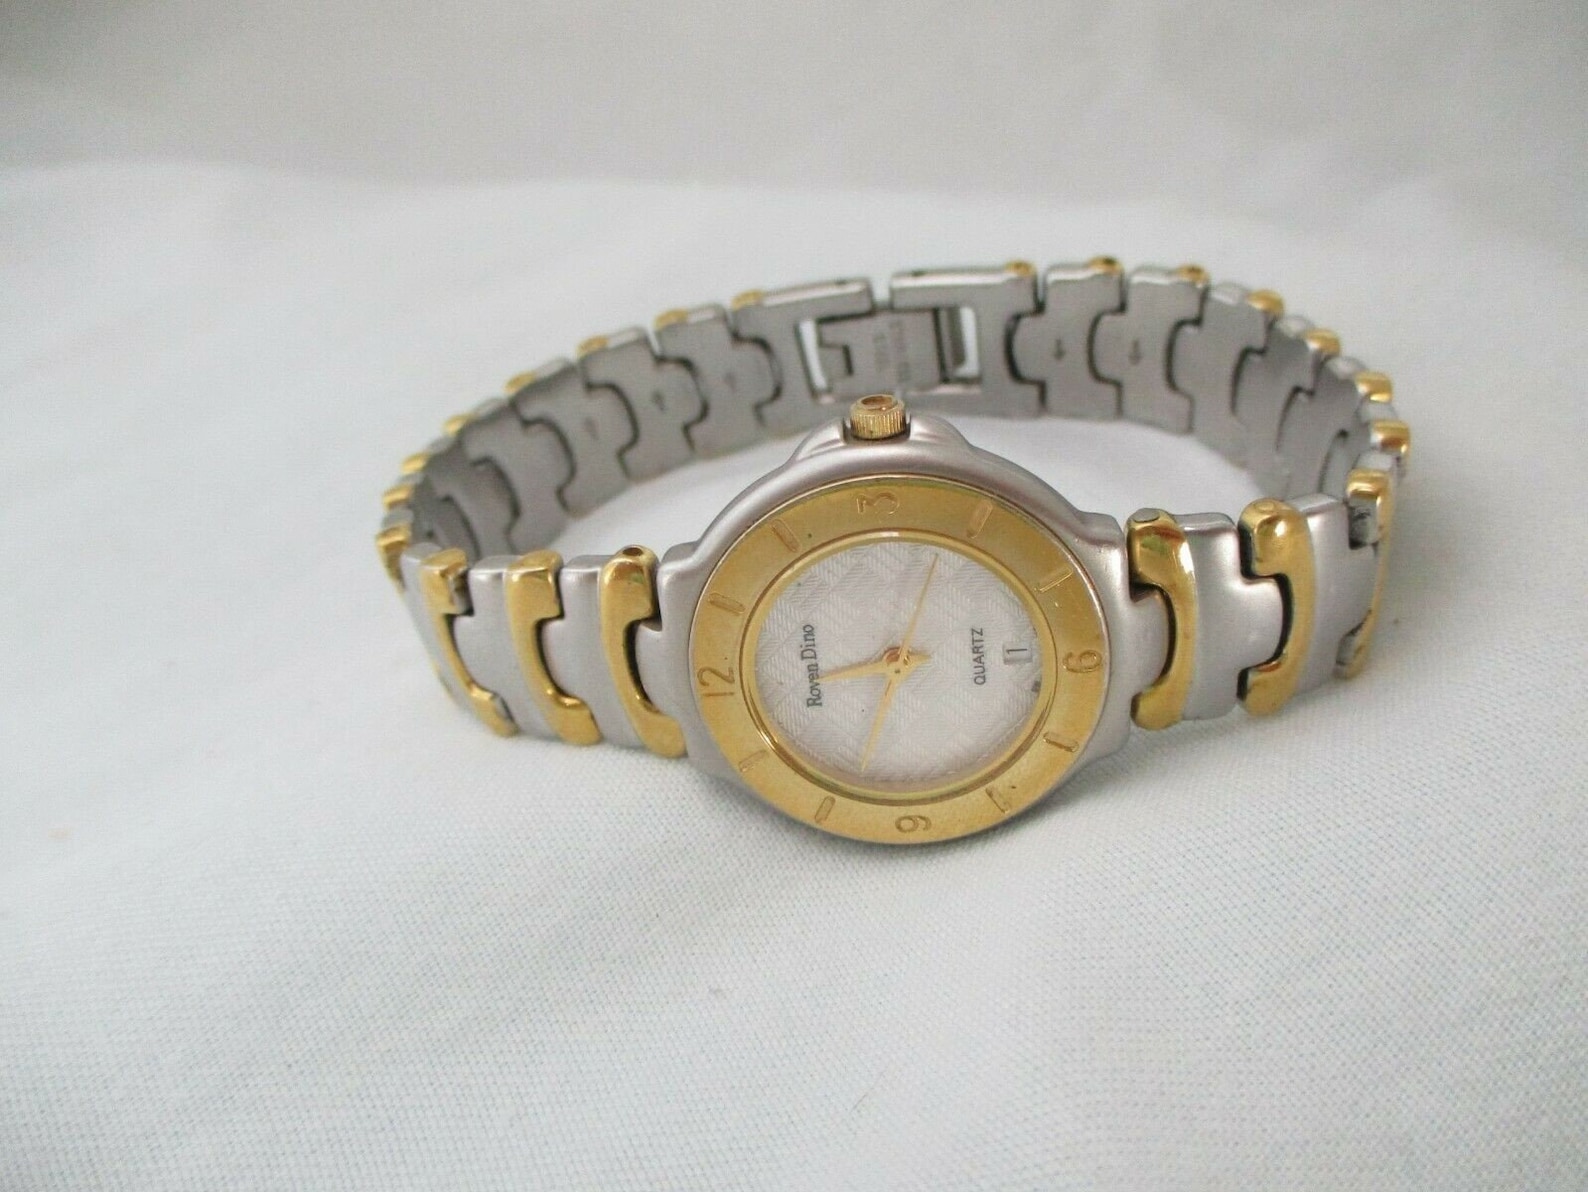 Roven Dino Watch Date Indicator Silver & Gold Toned Sapphire | Etsy